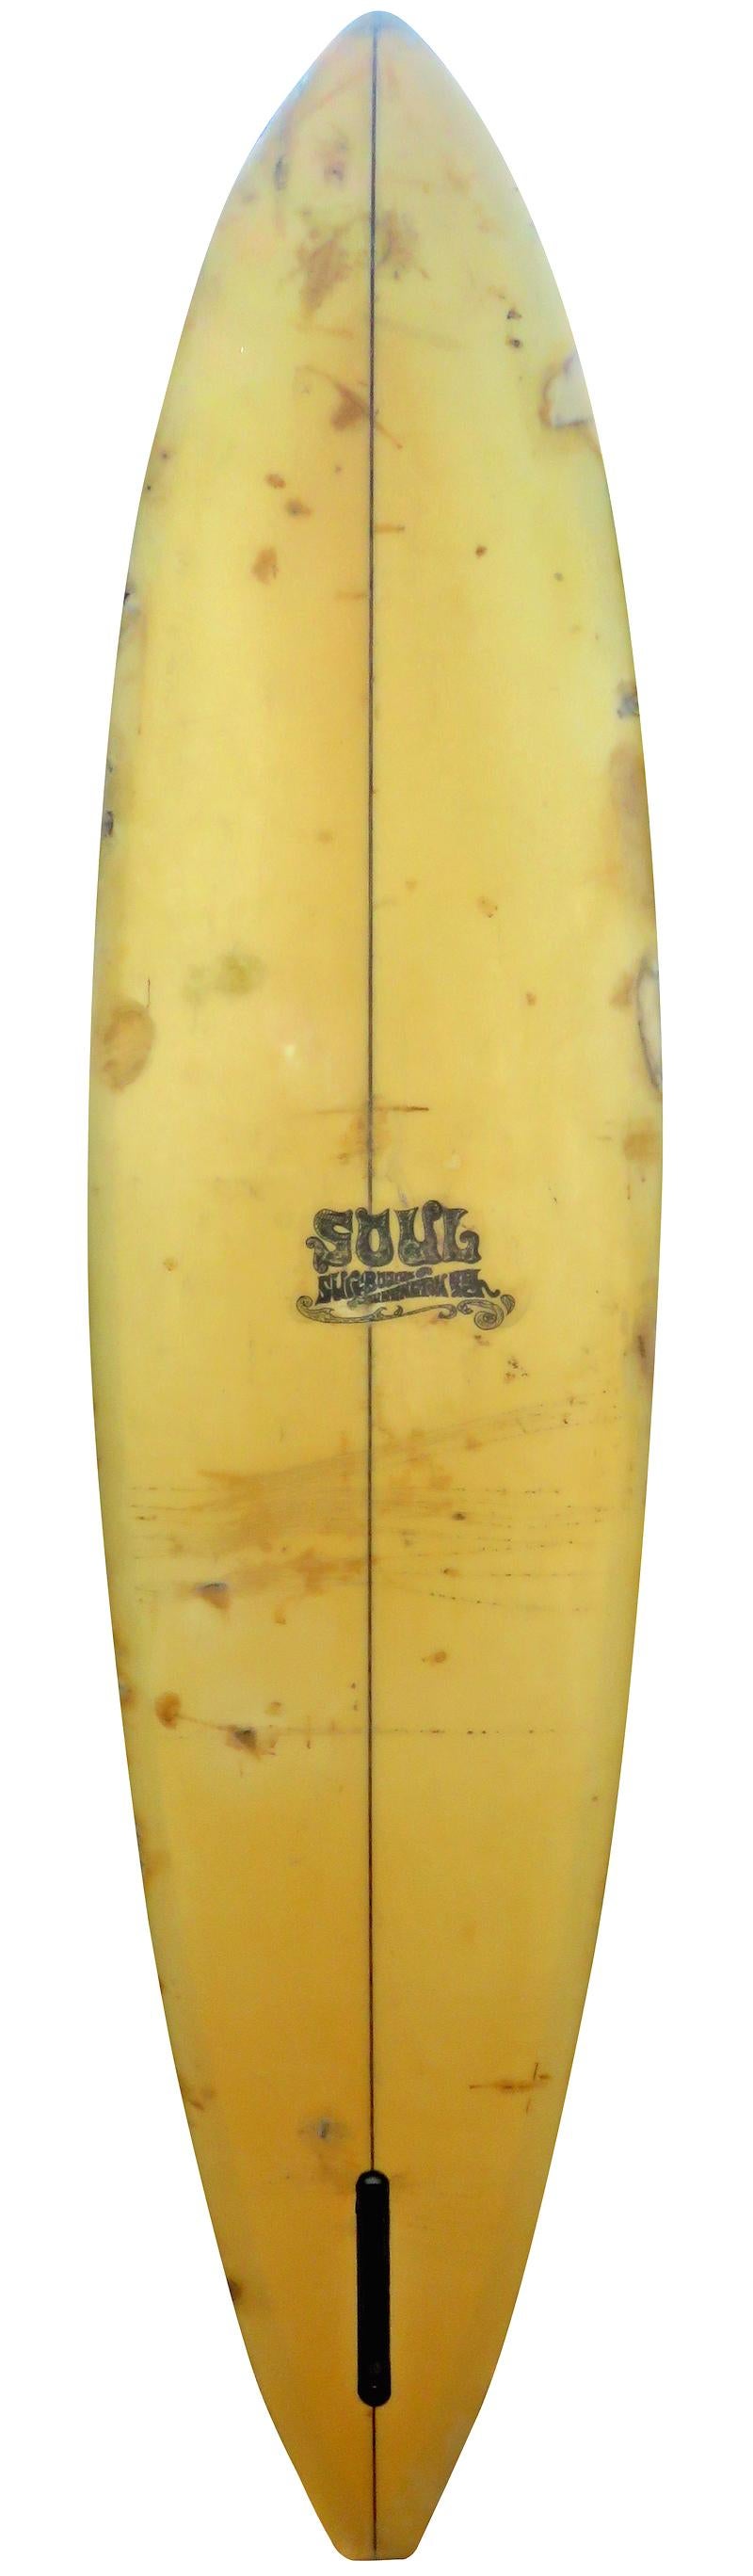 Soul surfboards single fin surfboard. Shaped in 1969 during the transitional period of surfboard history, when surfboards were just beginning to be shaped shorter in length. Made under the Soul Surfboards label out of Huntington Beach, California.